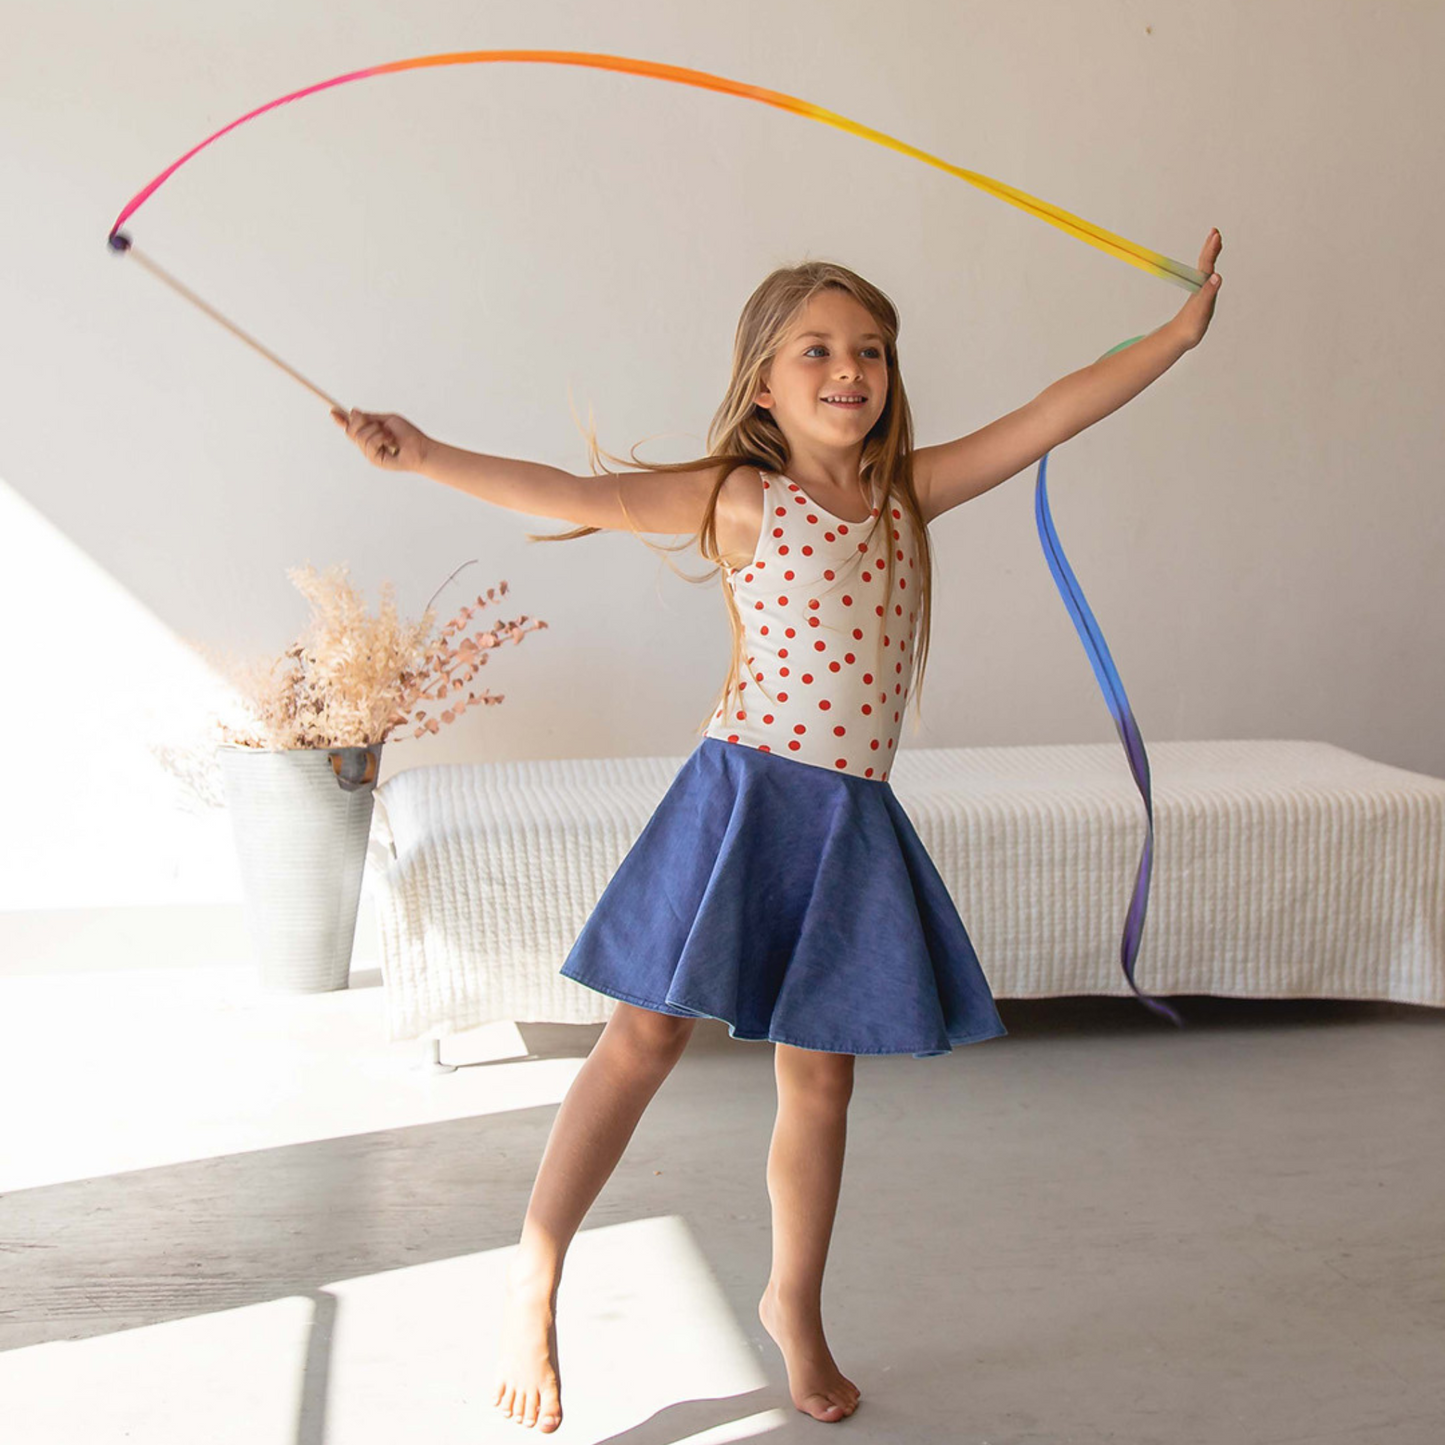 Rainbow Silk and Wood Streamer - Wand For Pretend Play